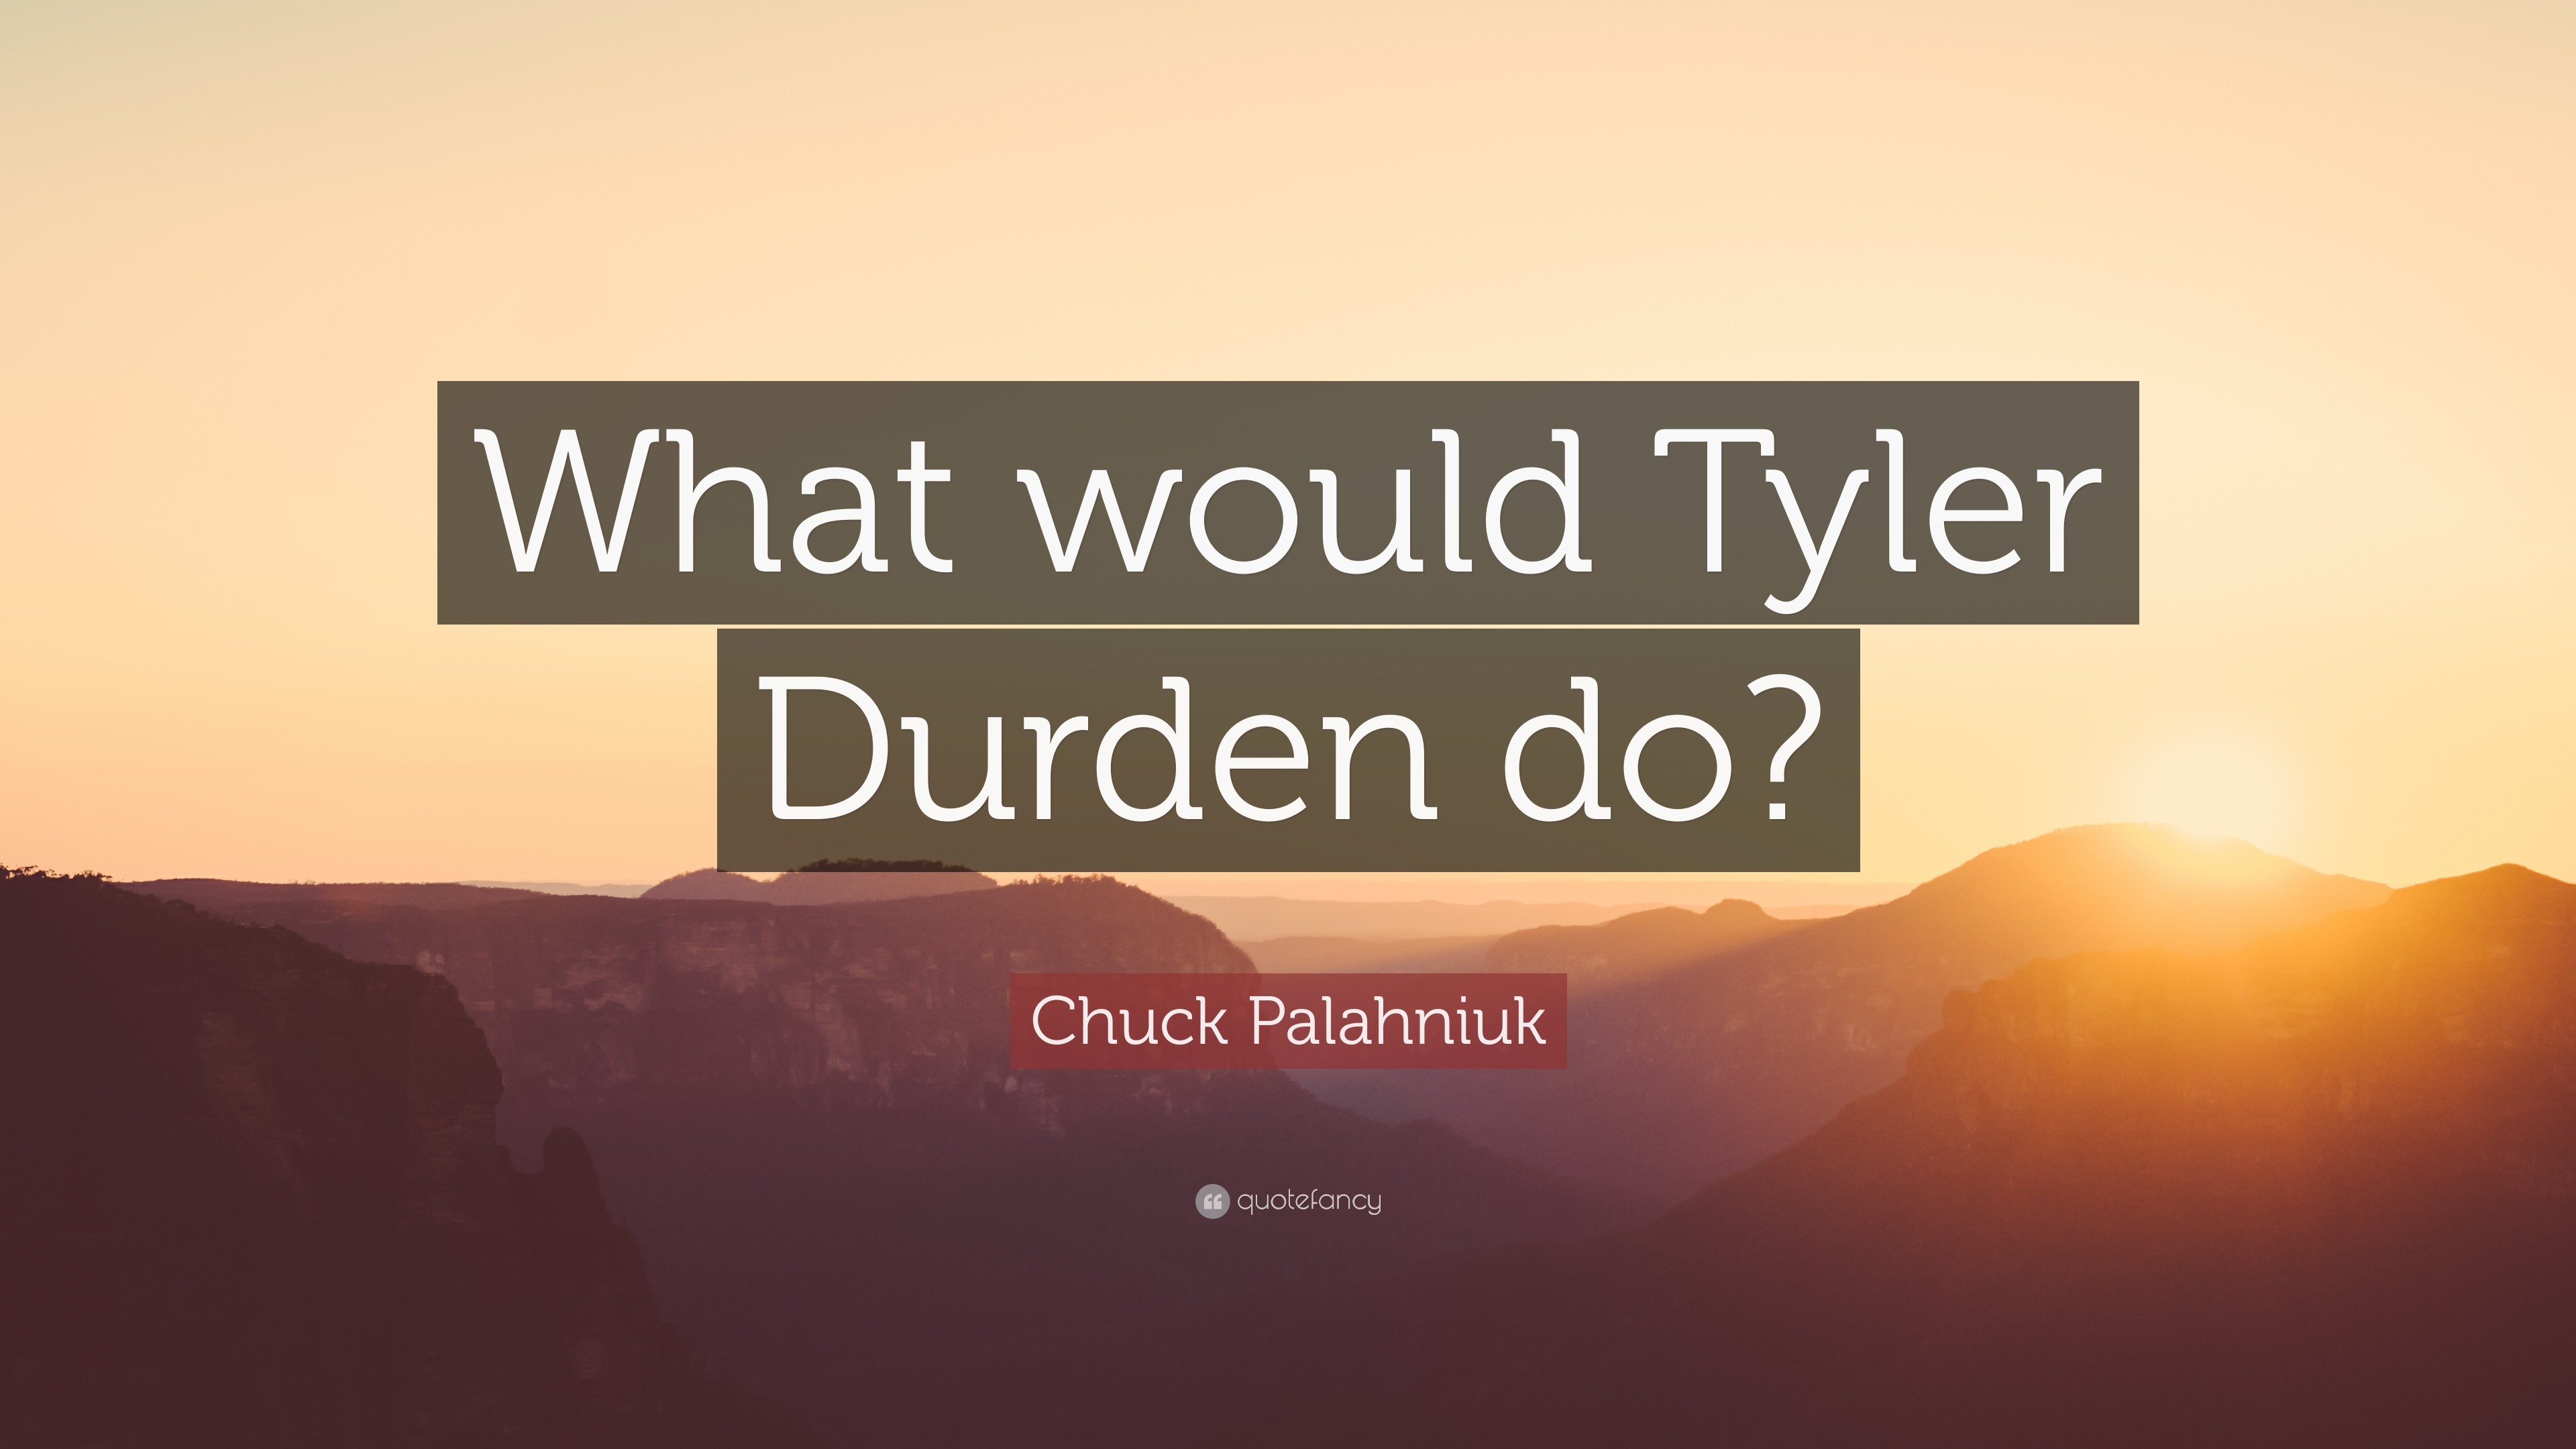 3840x2160 Chuck Palahniuk Quote: “What would Tyler Durden do?”